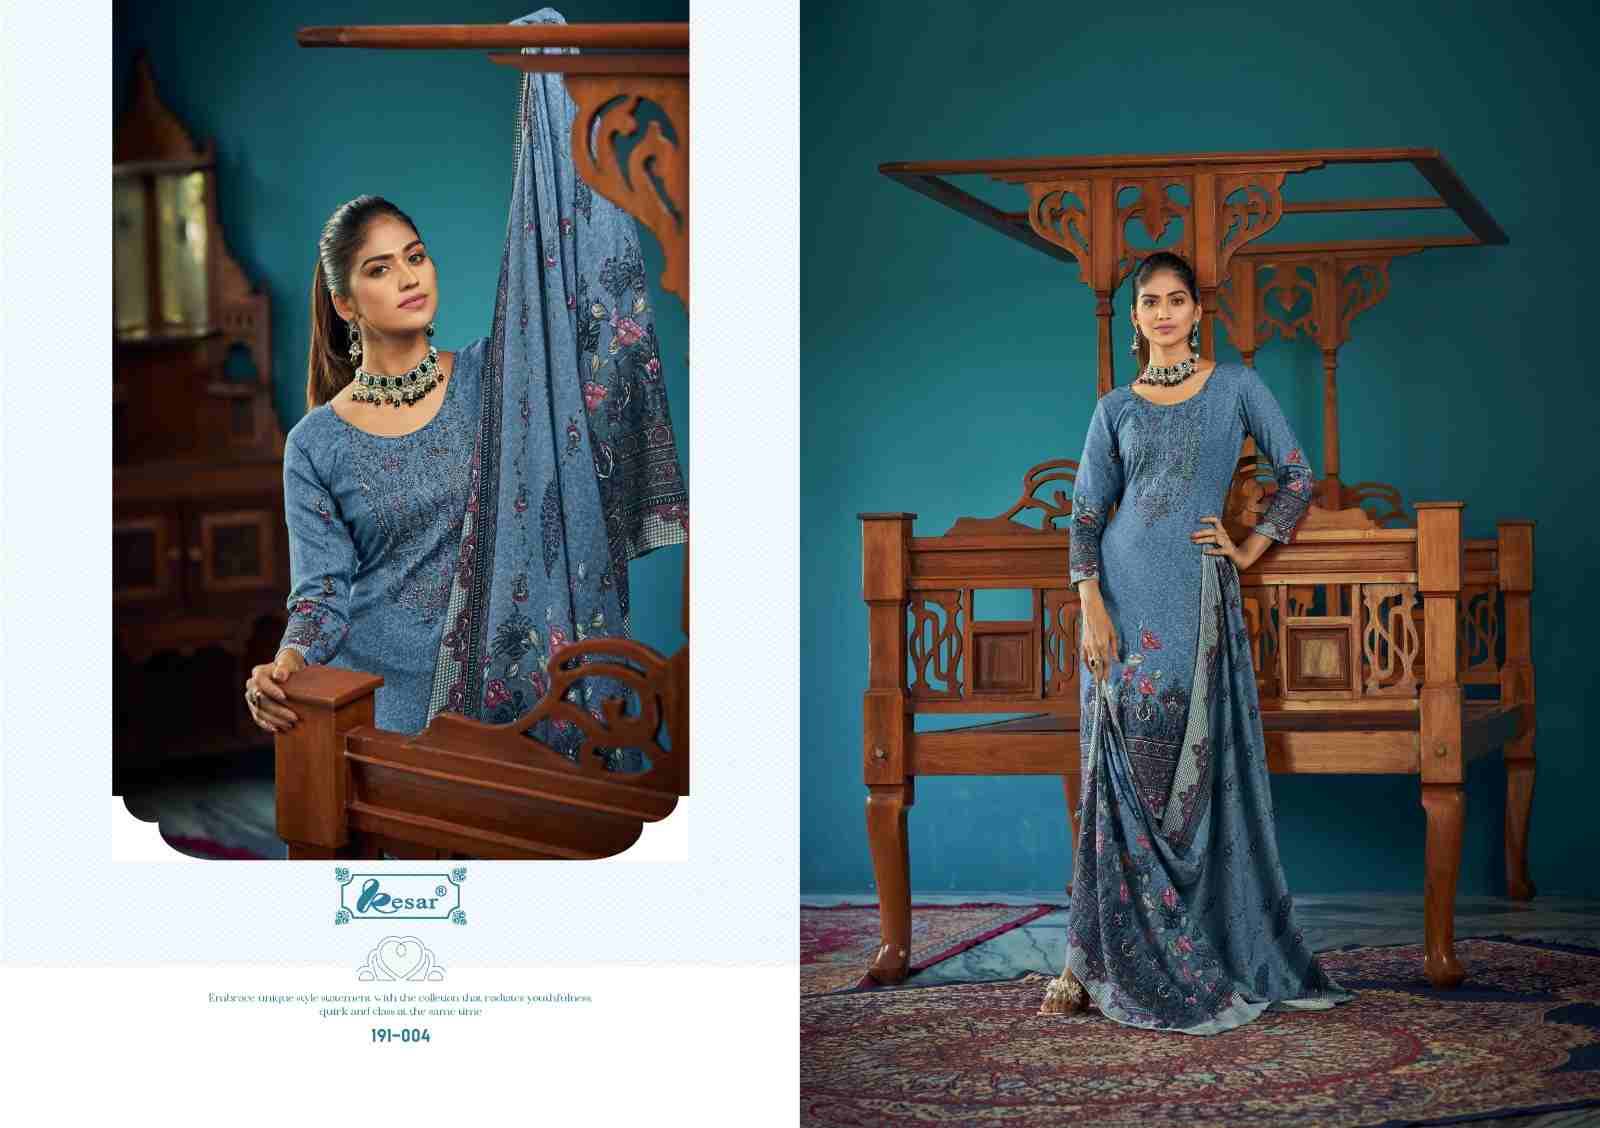 Amira By Kesar 191-001 To 191-006 Series Beautiful Festive Suits Colorful Stylish Fancy Casual Wear & Ethnic Wear Whoolan Dresses At Wholesale Price